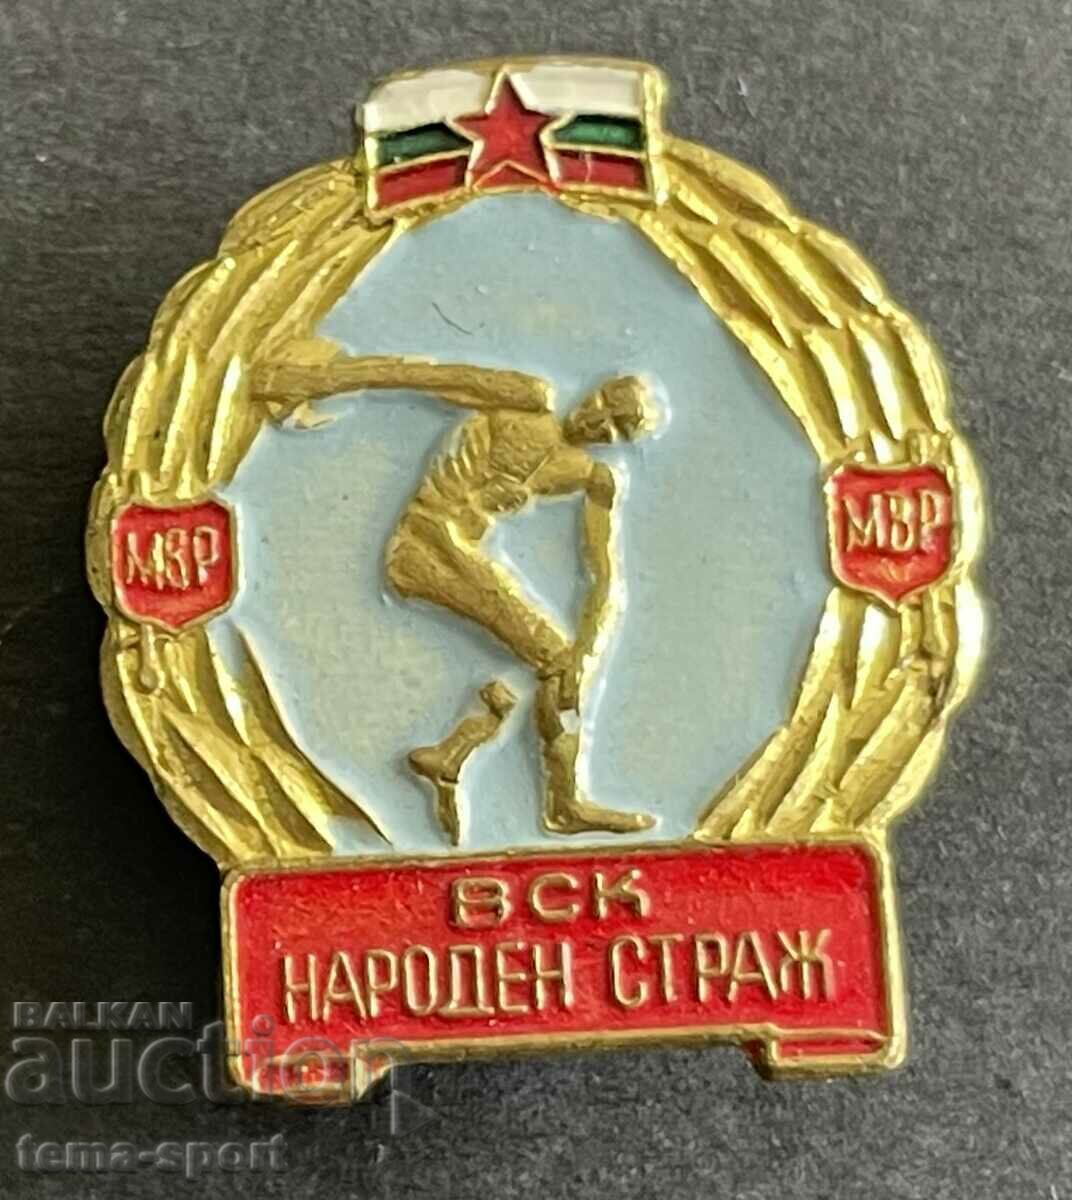 198 Bulgaria sign football club National Guard Ministry of Interior